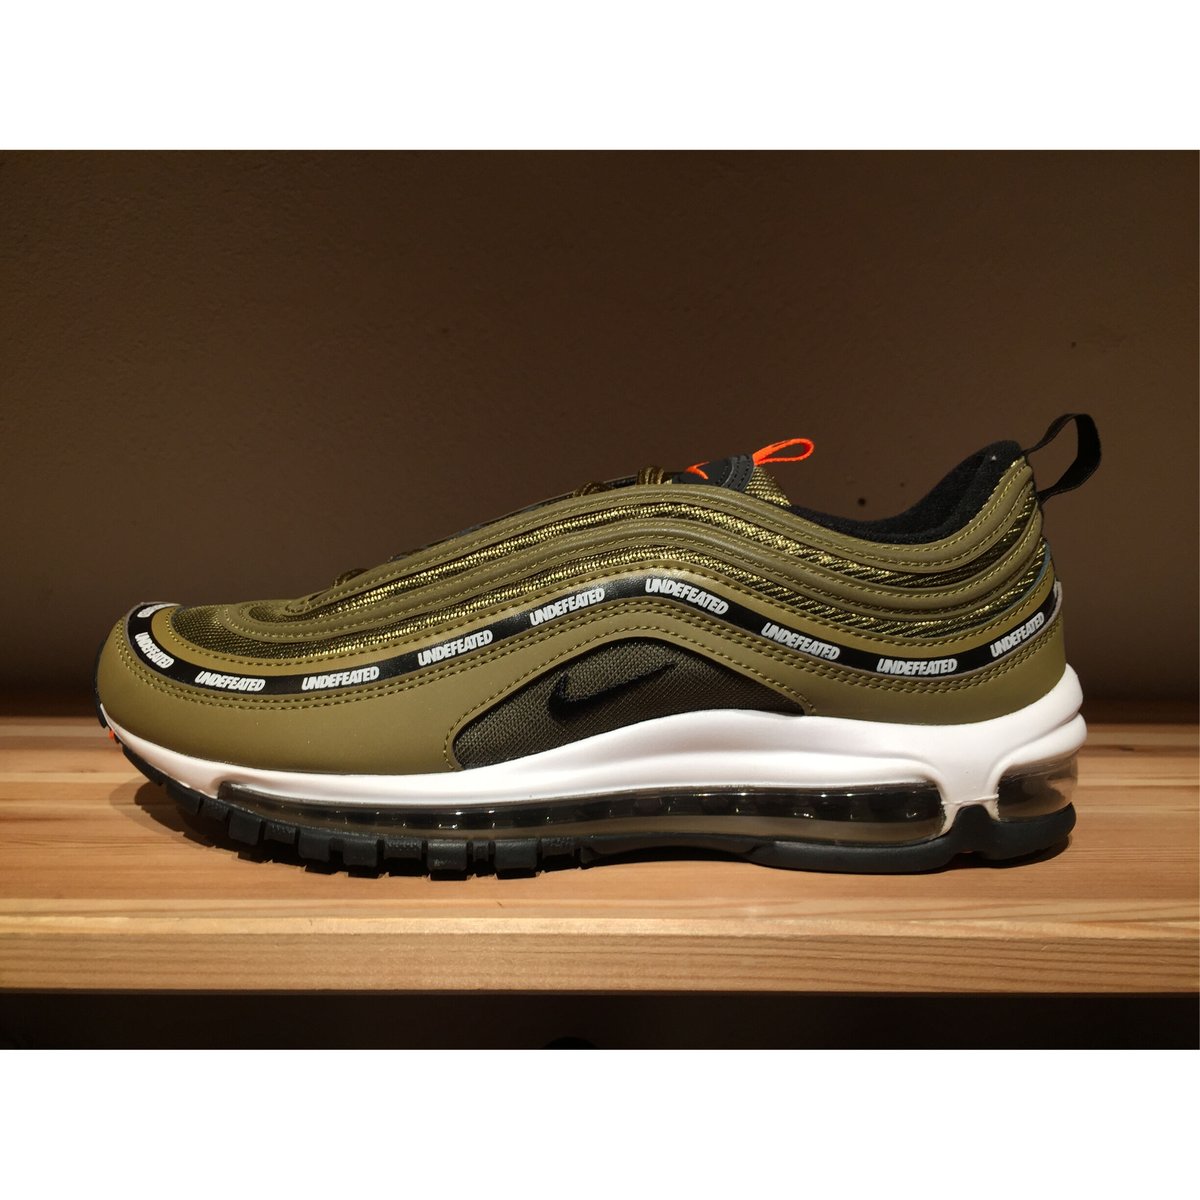 Undefeated Nike Air Max 97 バッグ&ソックス セット - www ...